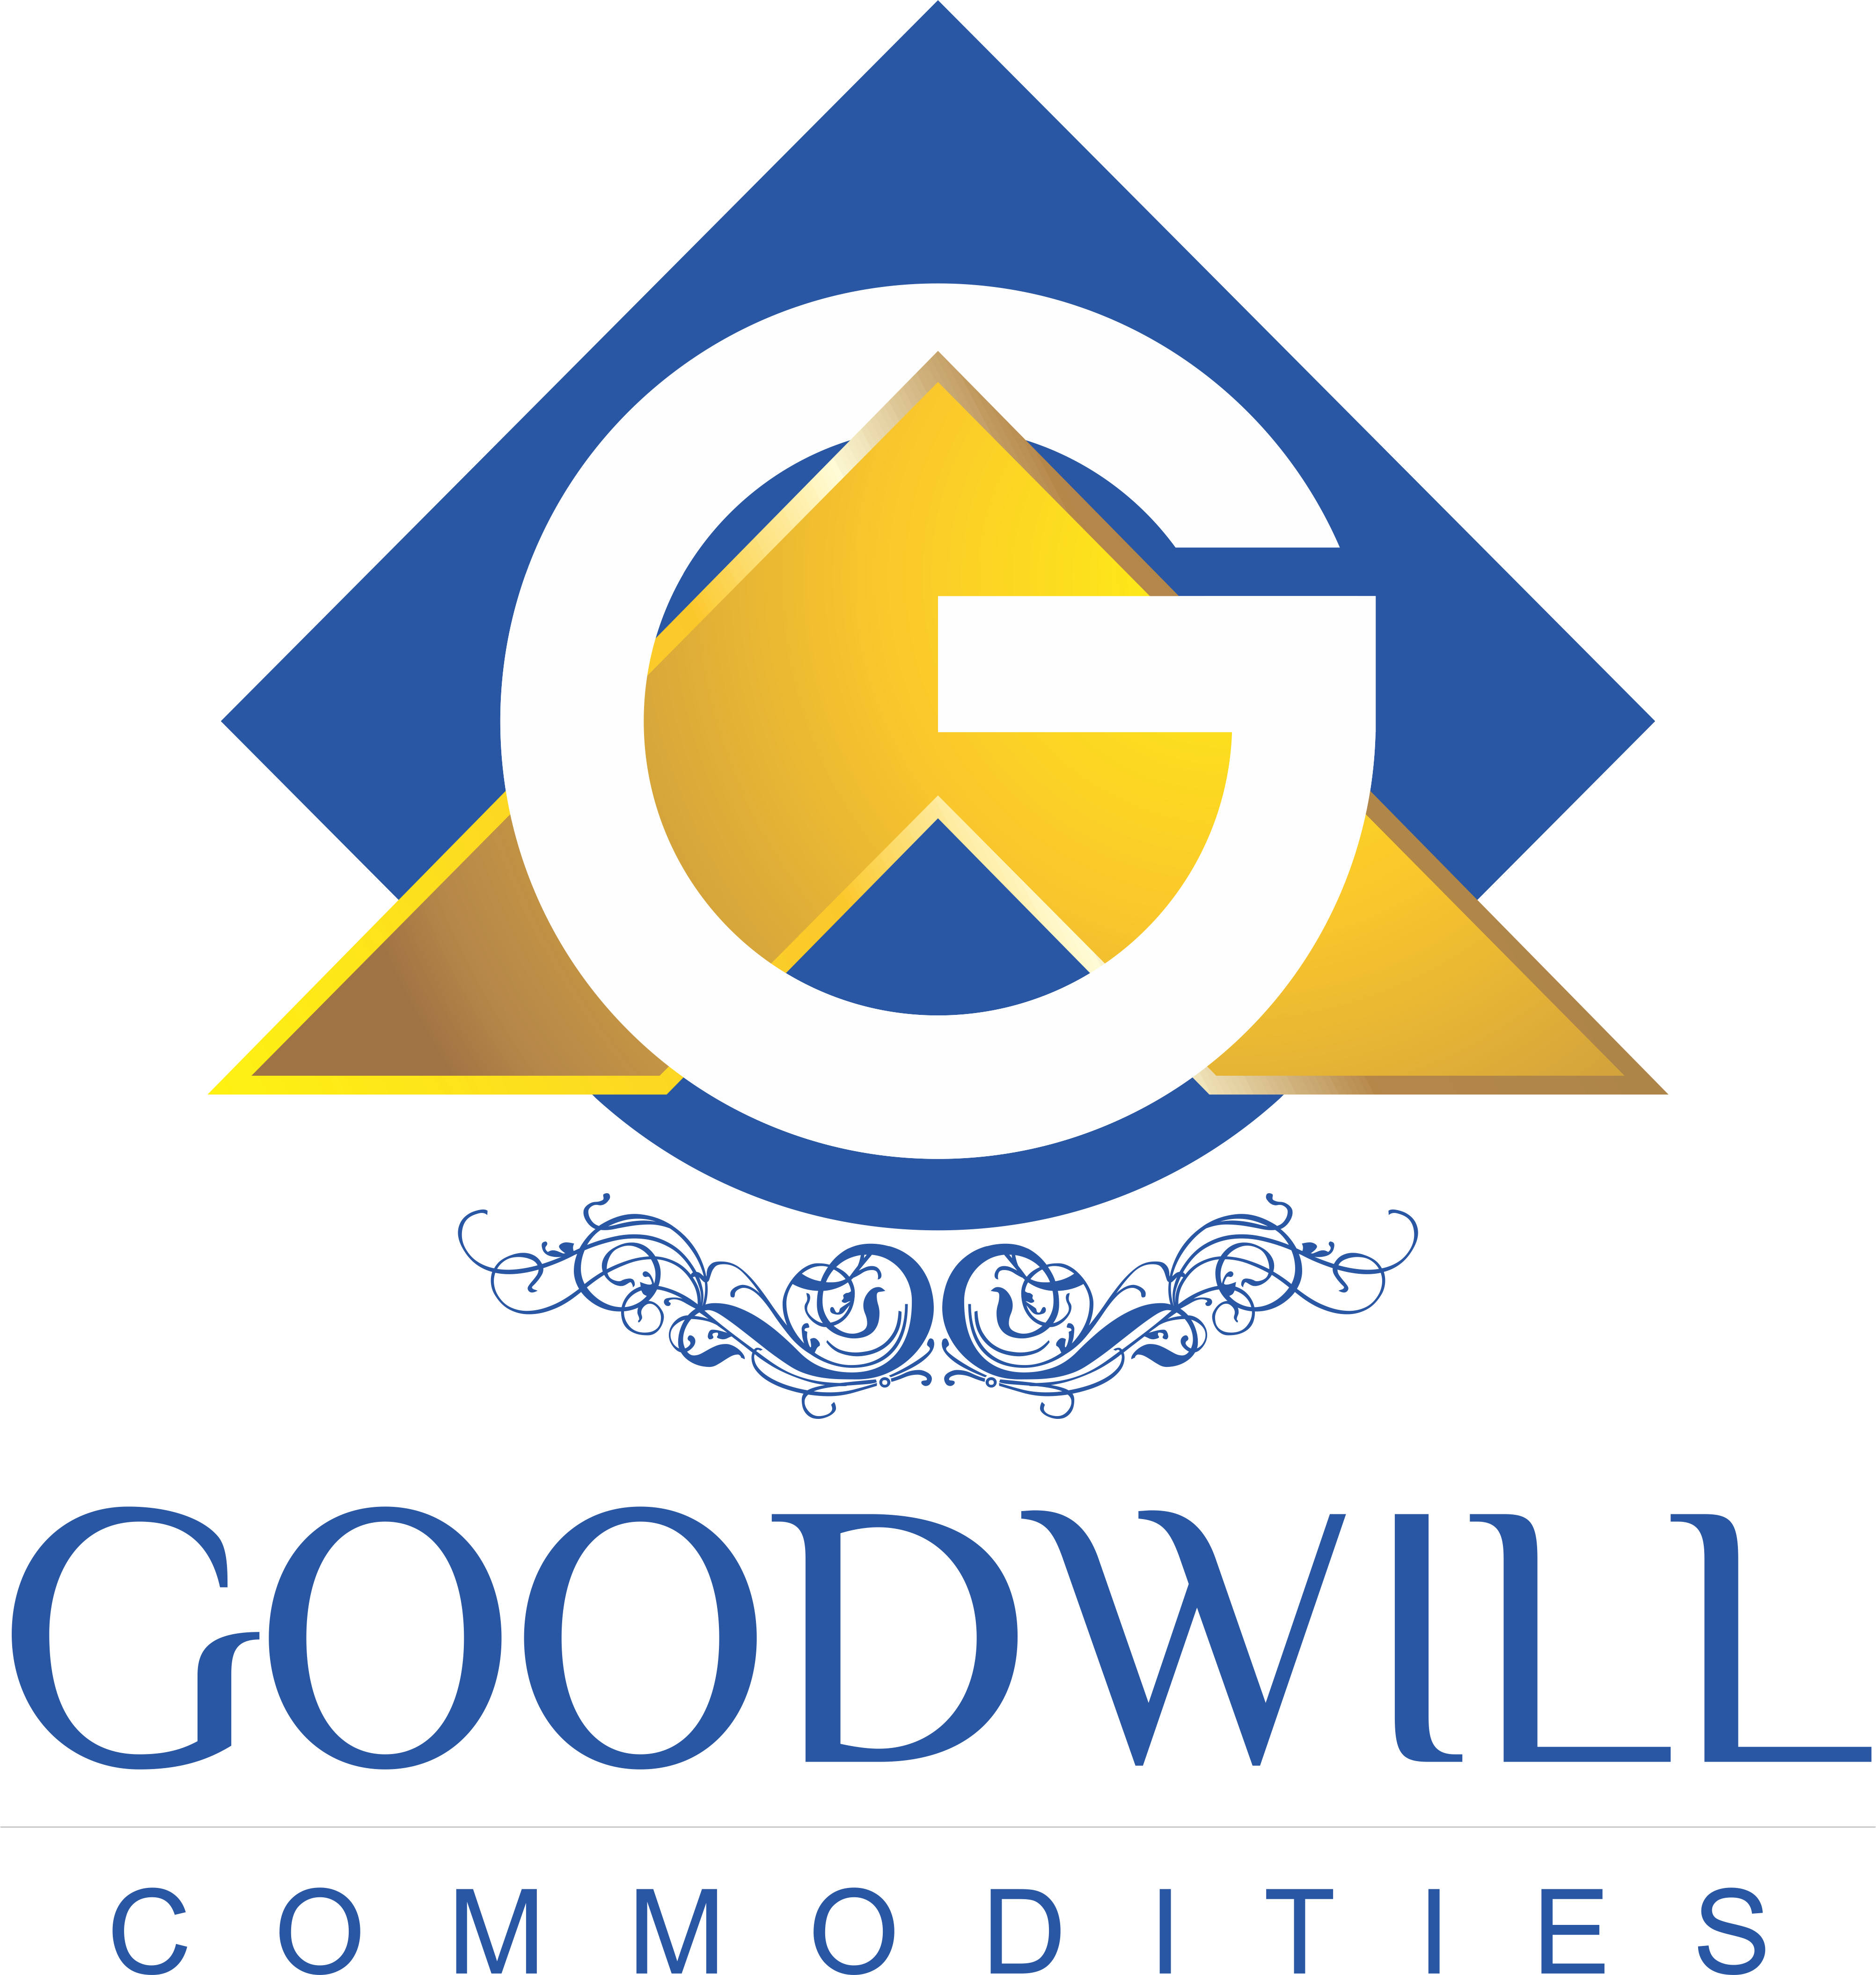 Goodwill Commodities Competitors, Revenue And Employees - Goodwill Comtrades Pvt Ltd (4008x4219), Png Download